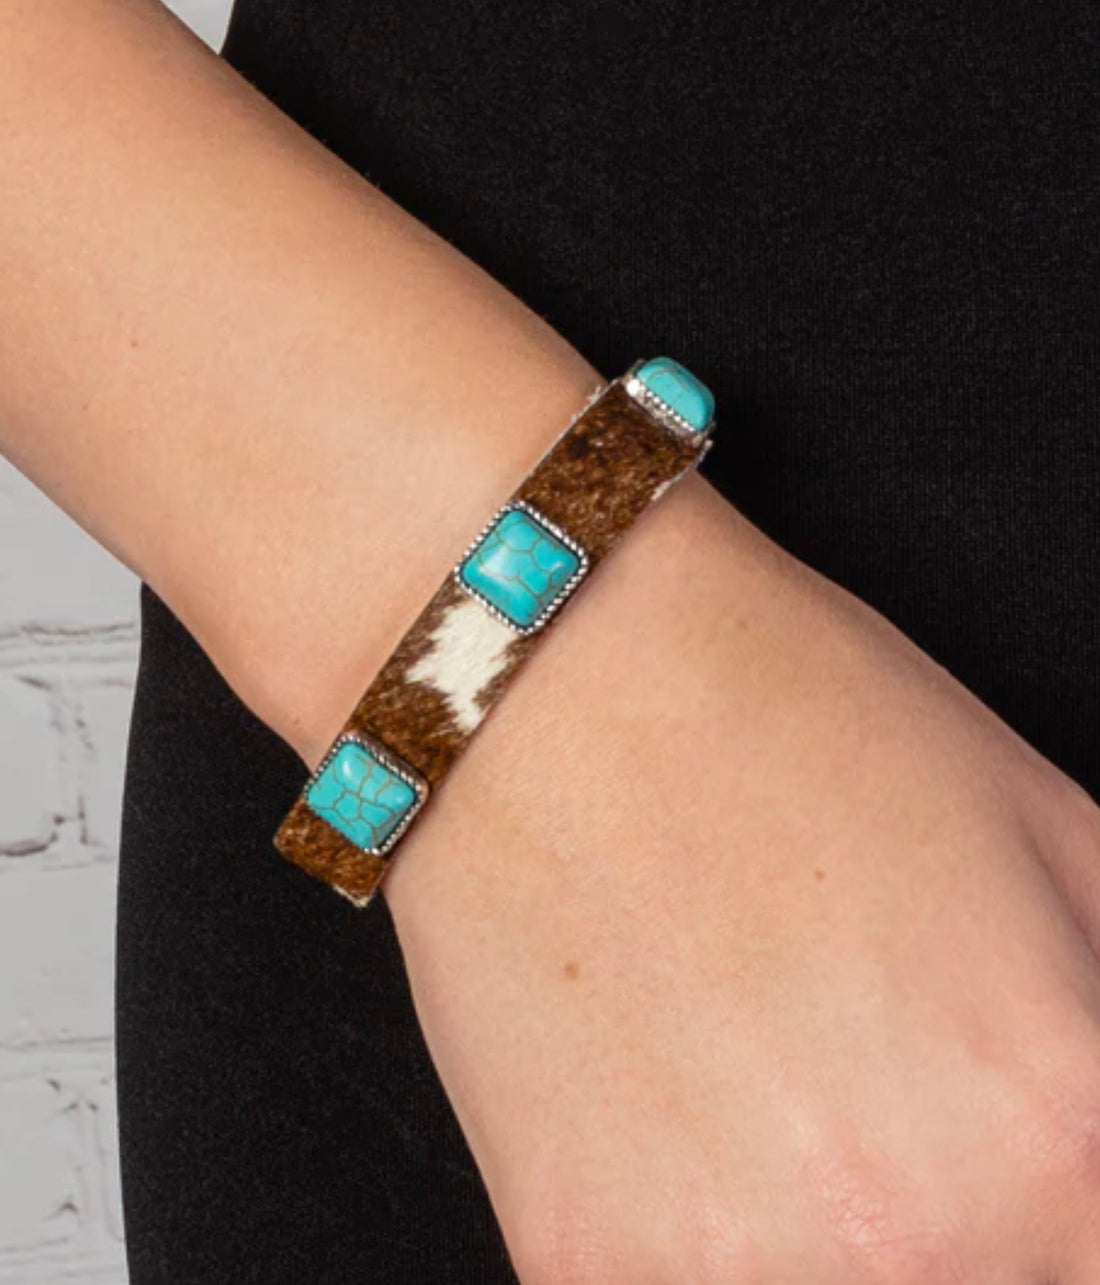 Dainty Animal Print Cuff Bracelet with Turquoise Stones